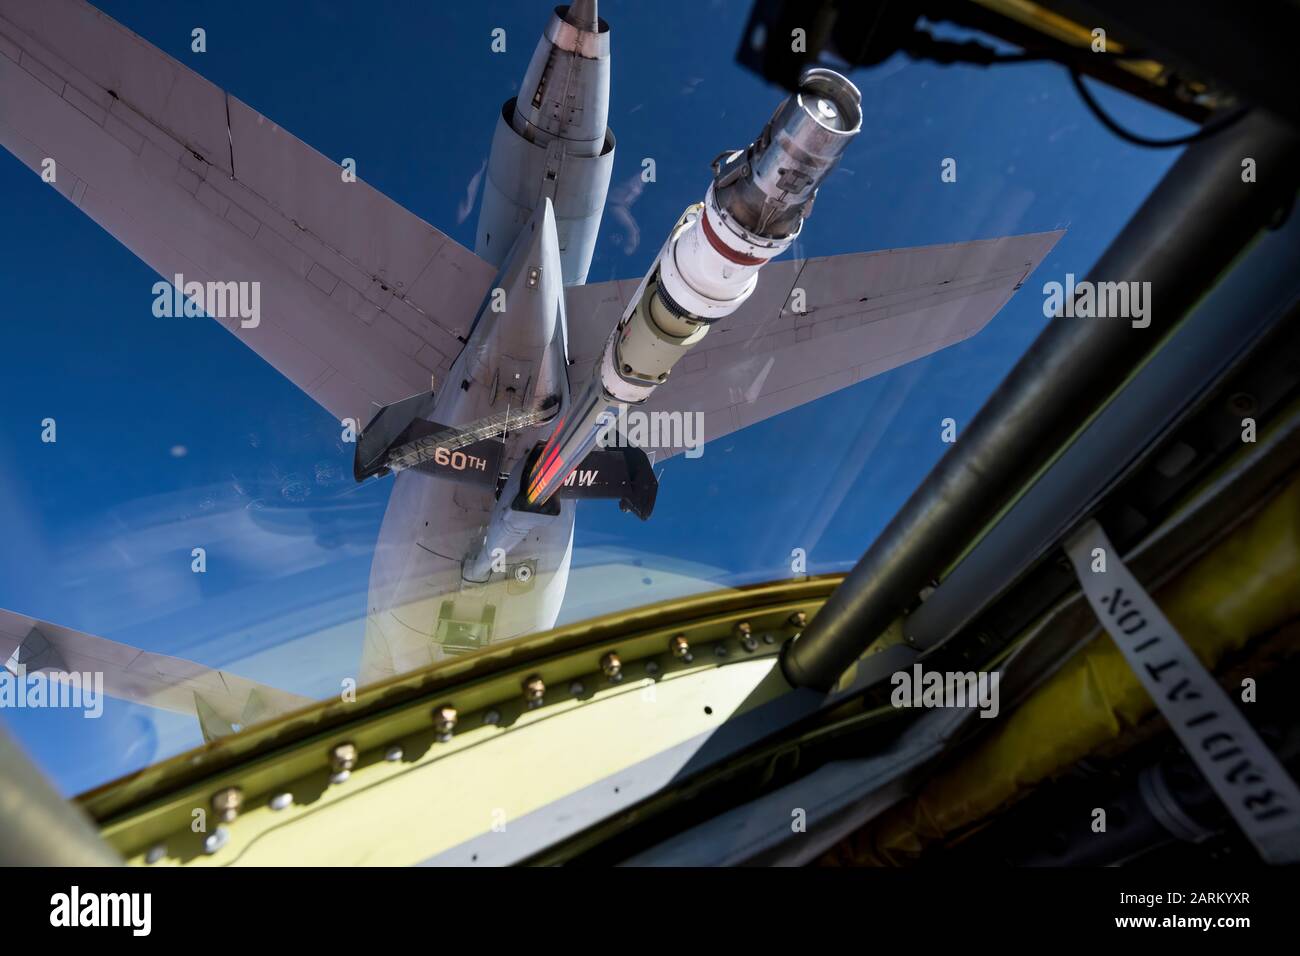 A U.S. Air Force 96th Bomb Squadron pilot positions a U.S. Air Force 2nd Bomb Wing B-52H Stratofortress behind a U.S. Air Force 60th Air Mobility Wing KC-10 Extender over Saudi Arabia in support of Bomber Task Force Europe 20-1, Nov. 1, 2019. The Stratofortress conducted a sortie to the U.S. Central Command area of operations in order to conduct interoperability training with Saudi partners in support of shared regional security interests. (U.S. Air Force photo by Tech. Sgt. Christopher Ruano) Stock Photo